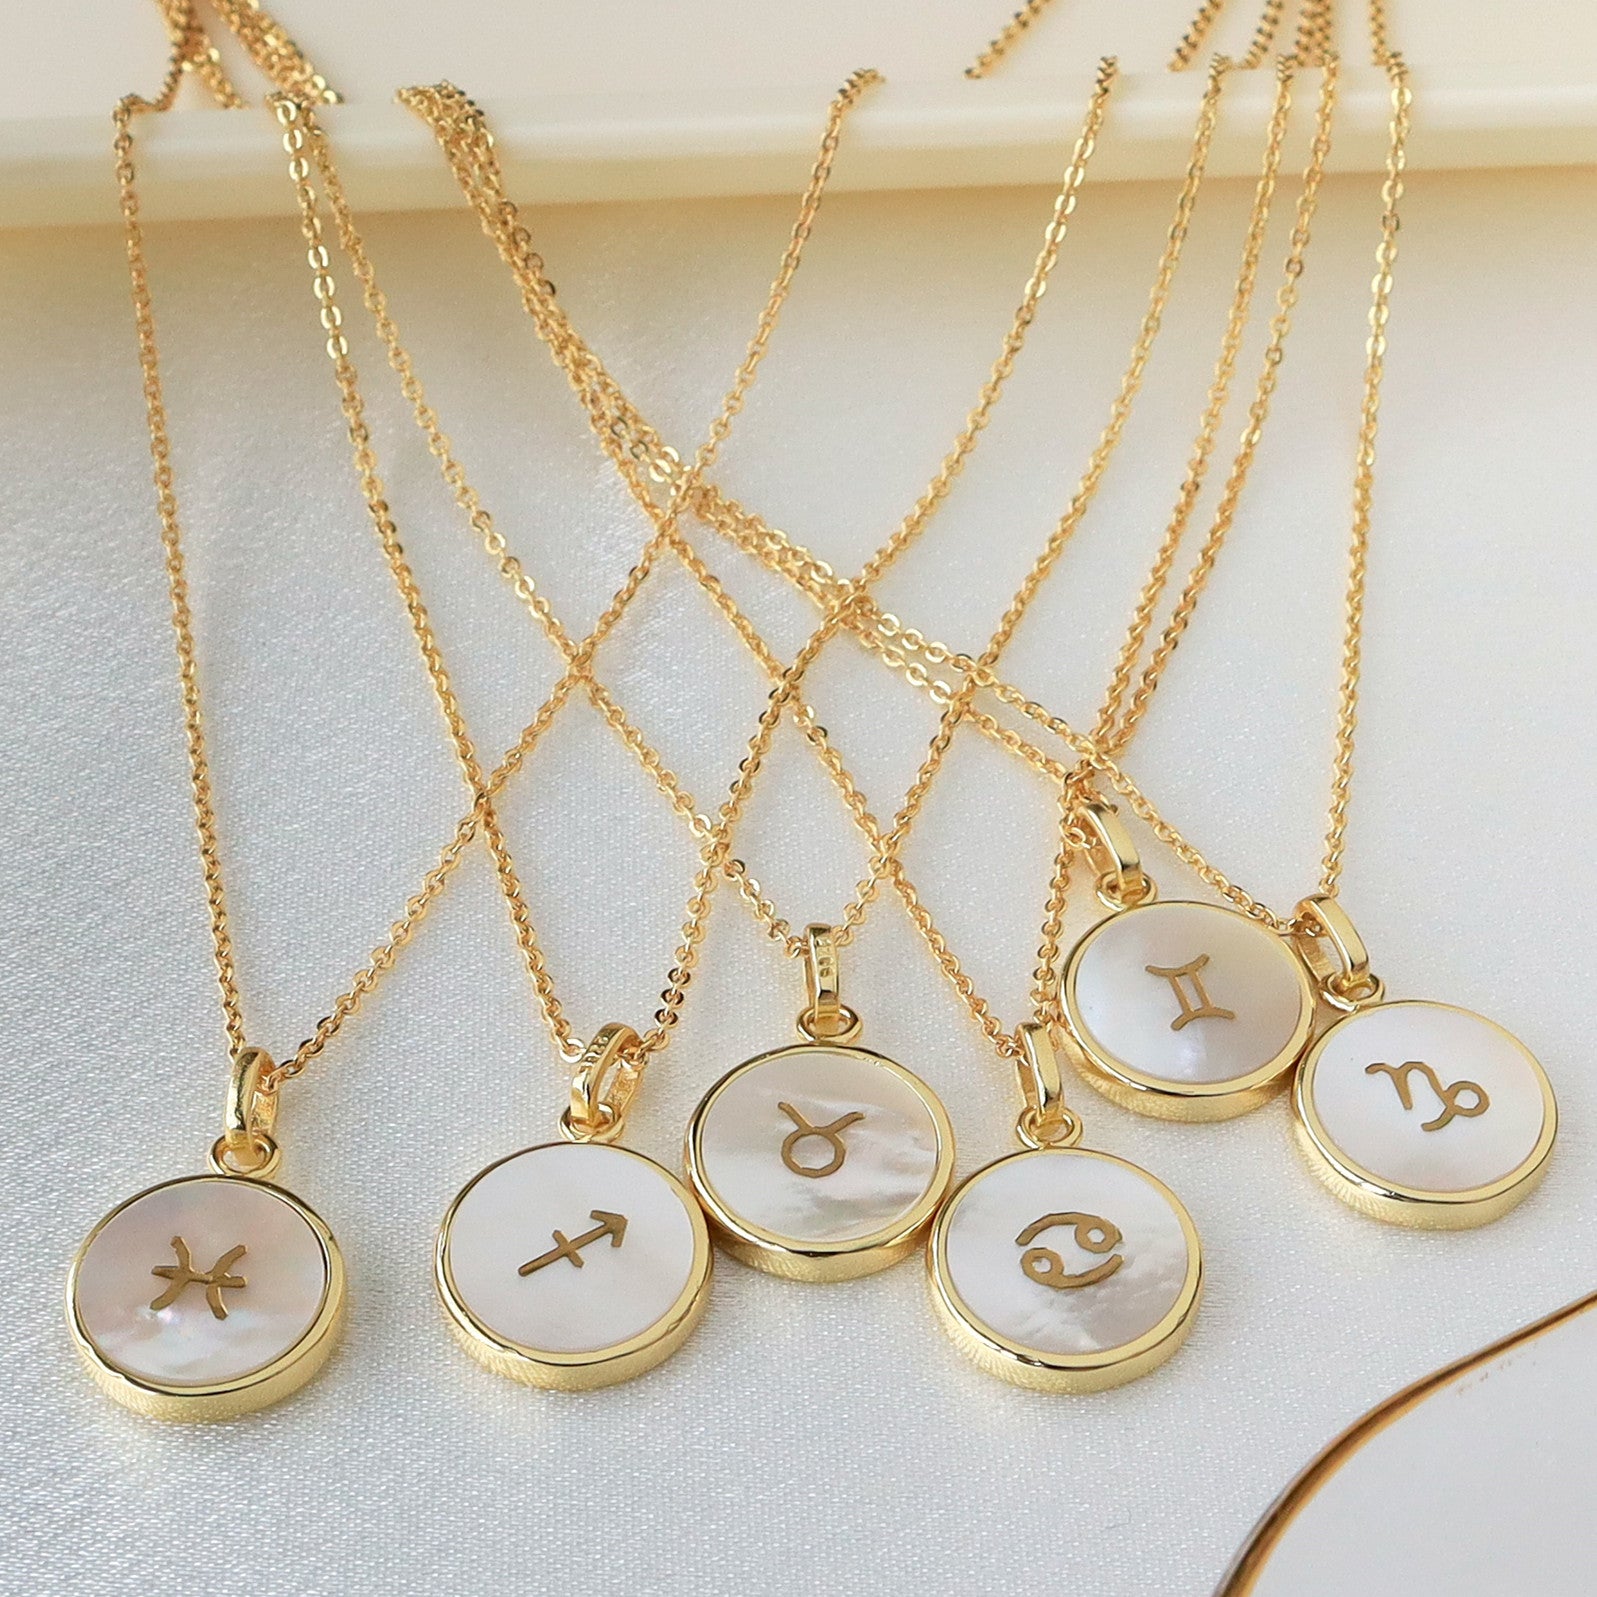 Wholesale Gold Plated Round White Shell Carved Constellation Pendant Necklace, Natural Shell Coin Jewelry KZ010